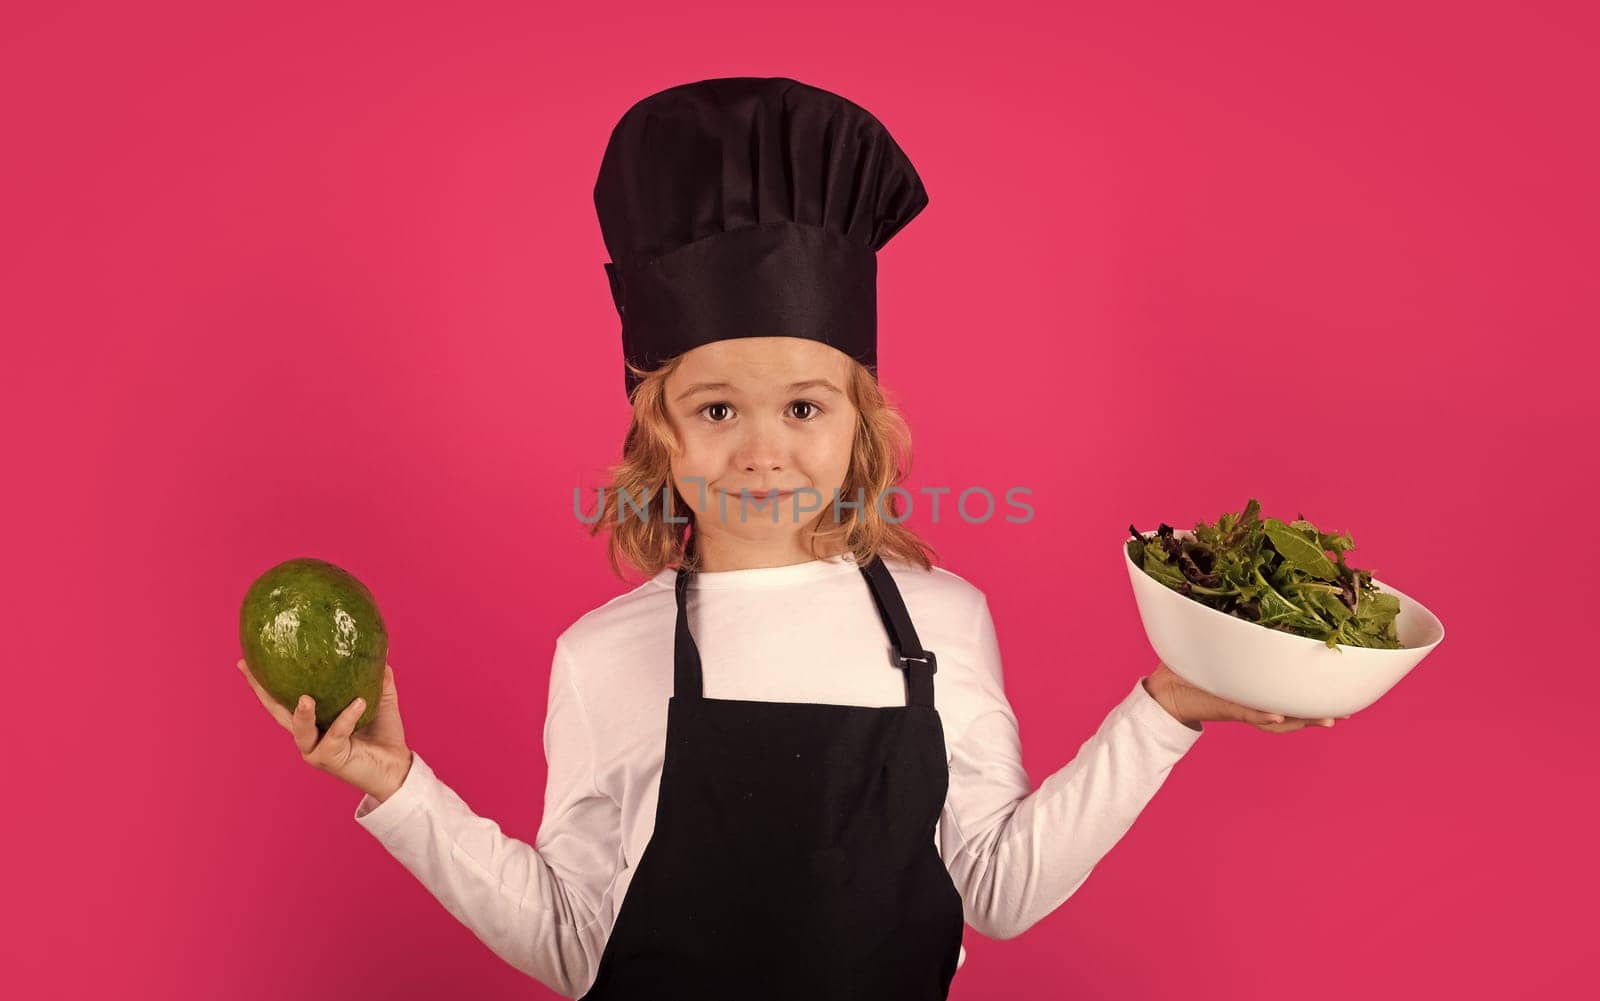 Funny child cook with avocado and vegetable. Child wearing cooker uniform and chef hat preparing food on kitchen, studio portrait. Cooking, culinary and kids food concept. by RedFoxStudio